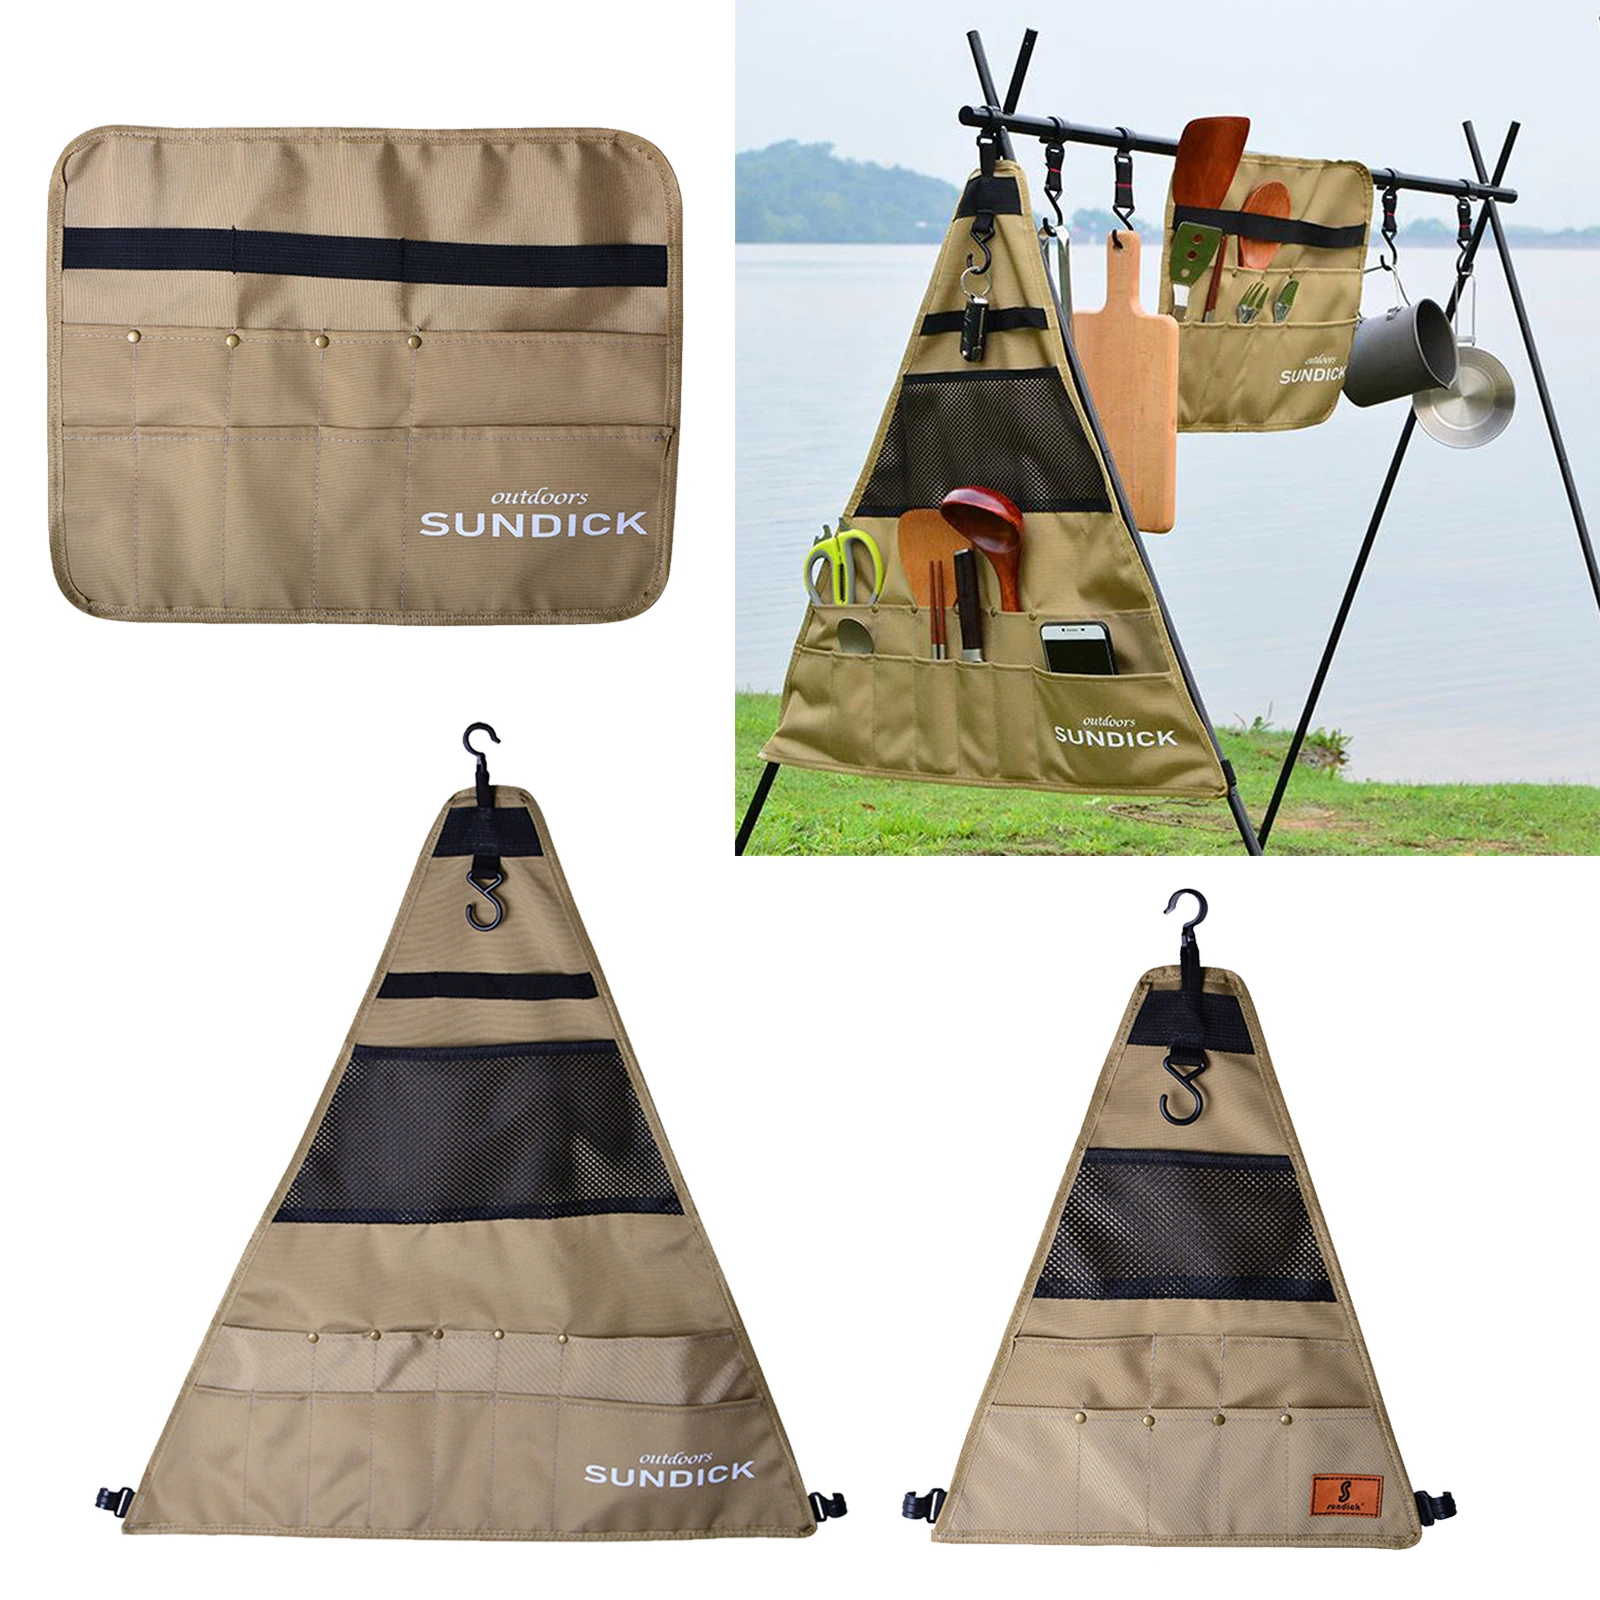 Waterproof Tableware Storage Bag 900D Oxford Fabric Outdoor Camping Picnic Barbecue BBQ Cookware Hanging Storage Bag